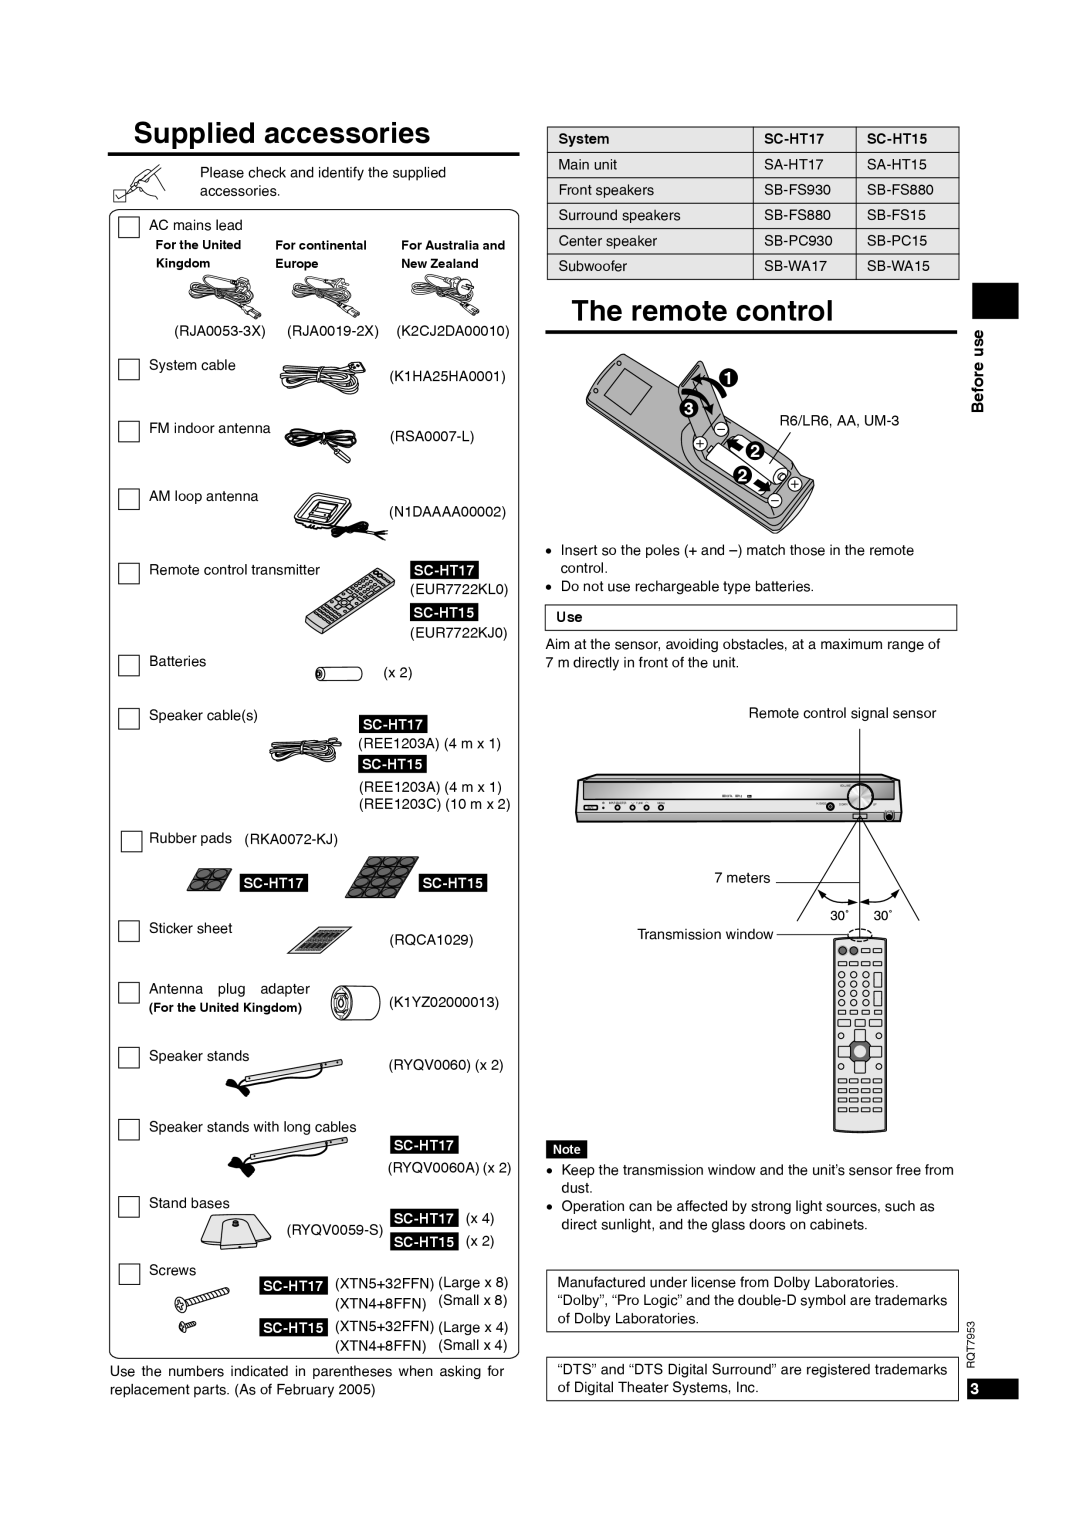 Panasonic SC-HT17 operating instructions Supplied accessories, The remote control, Remote control transmitter, SC-HT15 